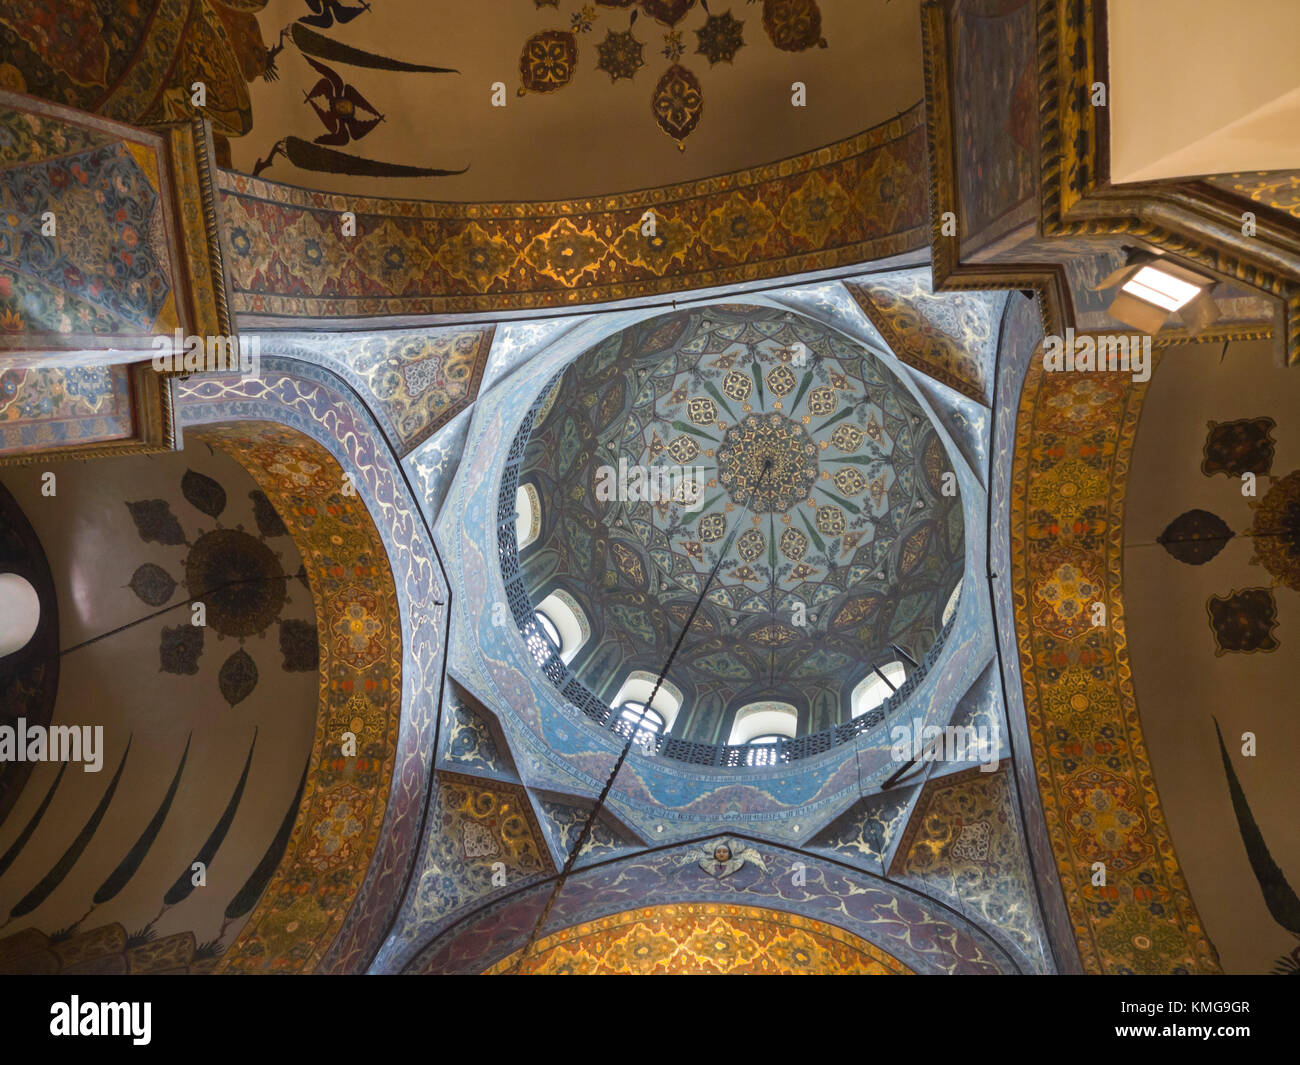 Mother See of Holy Etchmiadzin, seat of the Apostolic Church, in Vagharshapat Armavir, Armenia, interior view from the cathedral with decorated dome Stock Photo